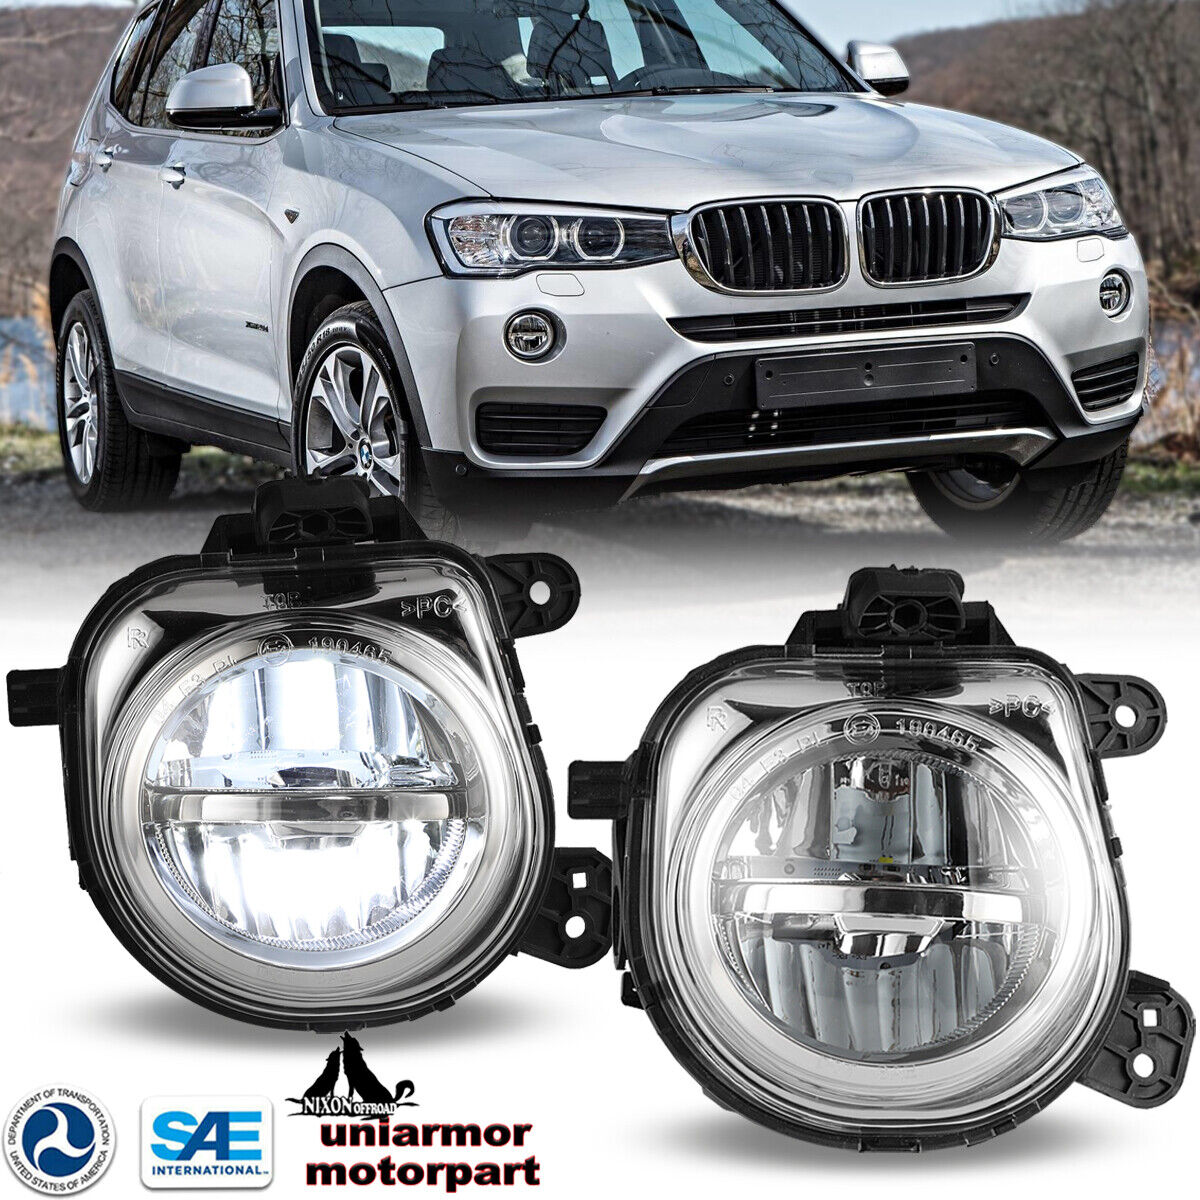 For 11-17 BMW X3 16-18 BMW X1/X4/X5/X6 LED Fog Lights Front Driving Lamps Pair